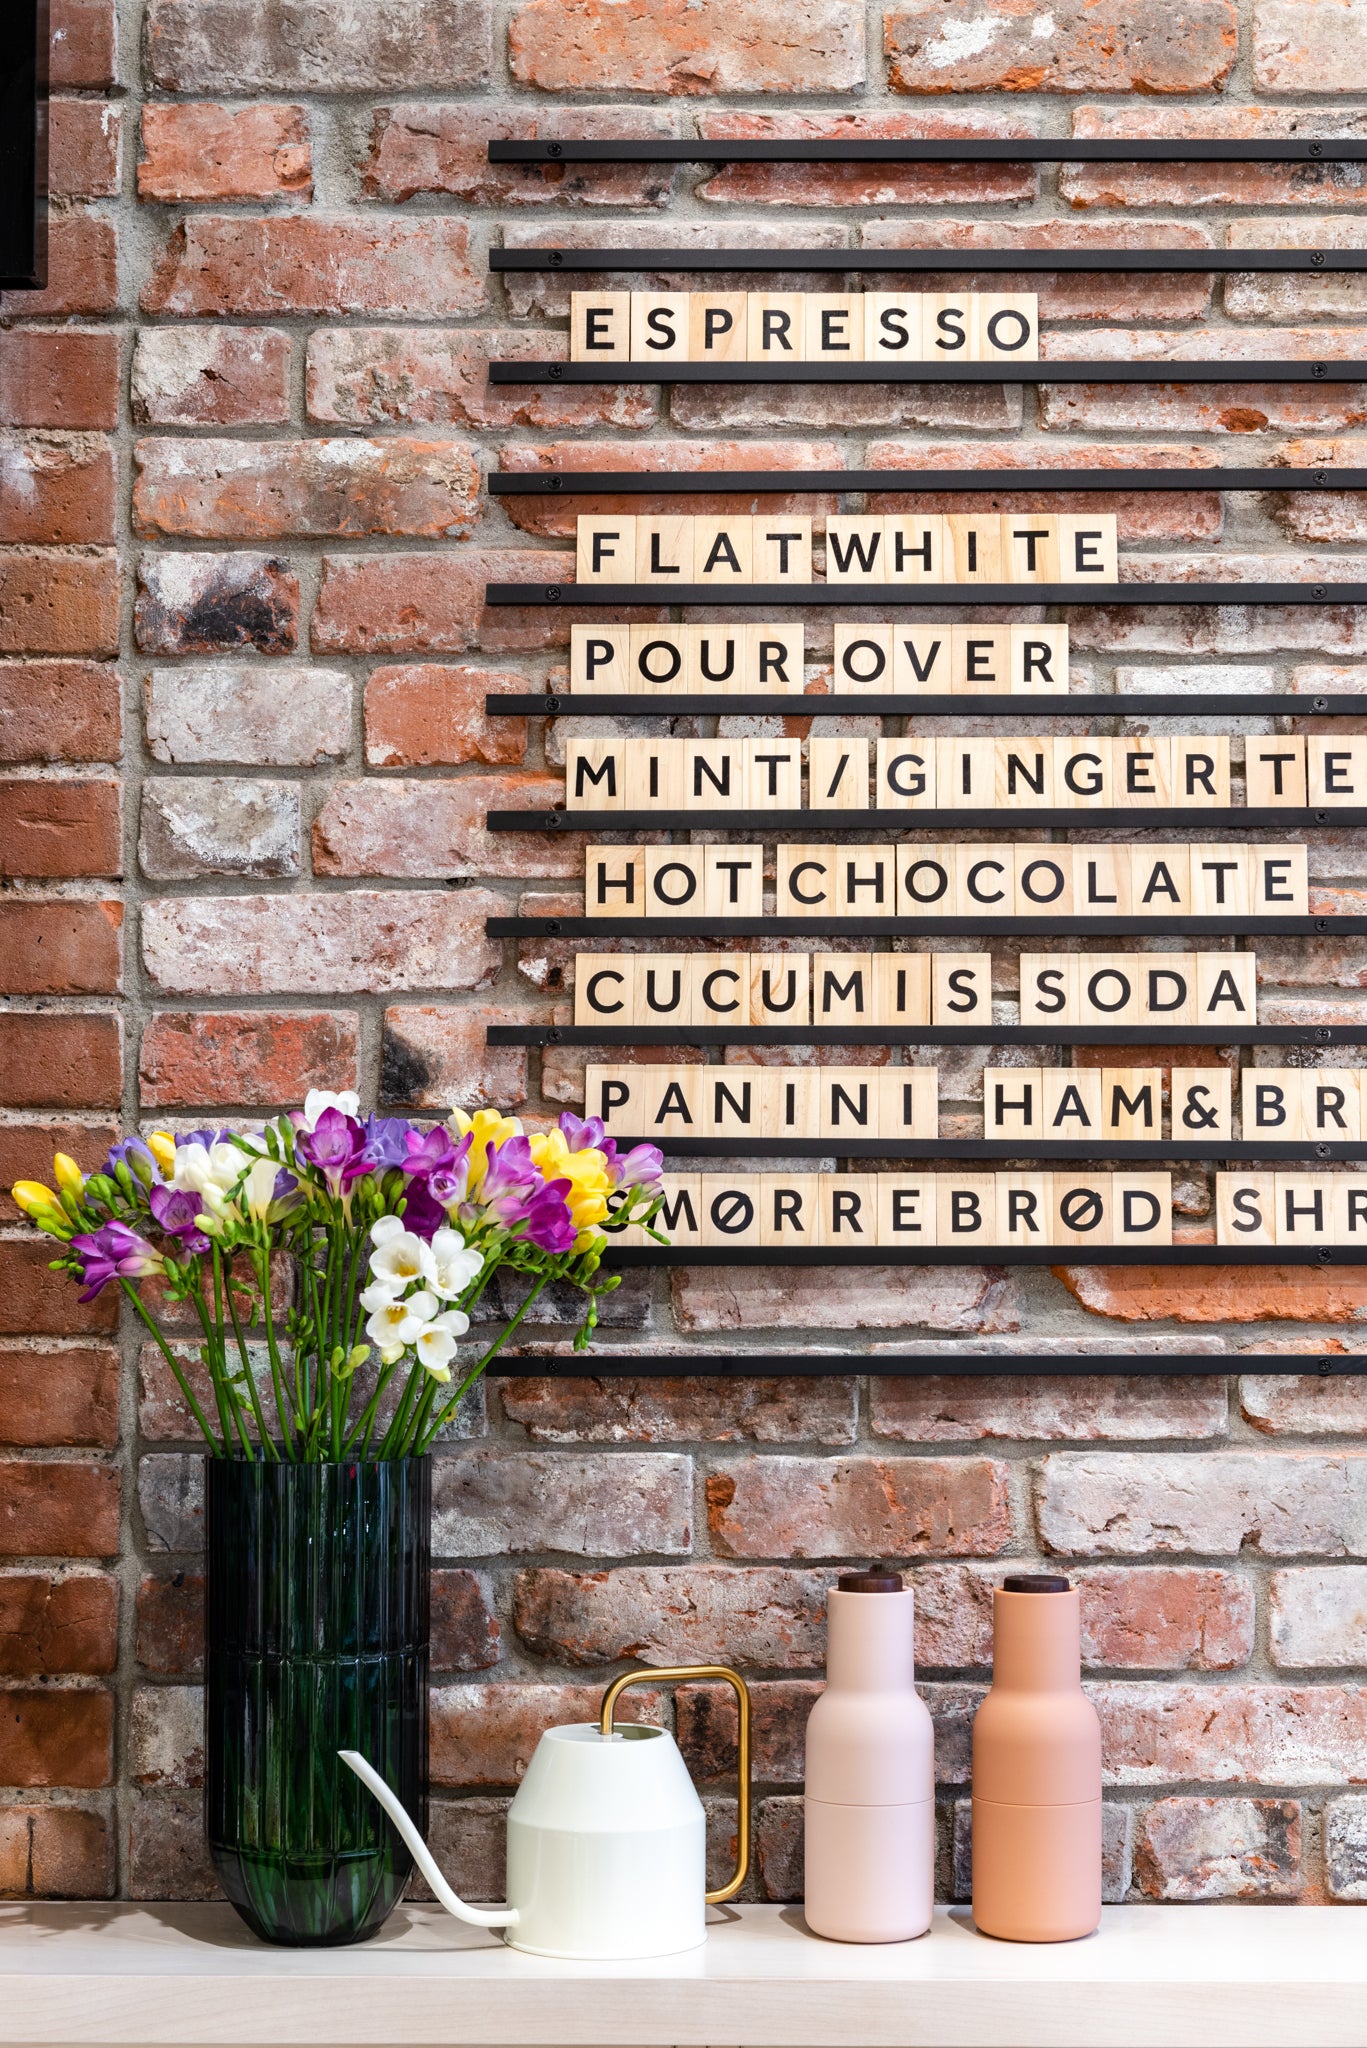 Wooden Letter Board On Brick Wall For A Cafe Menu